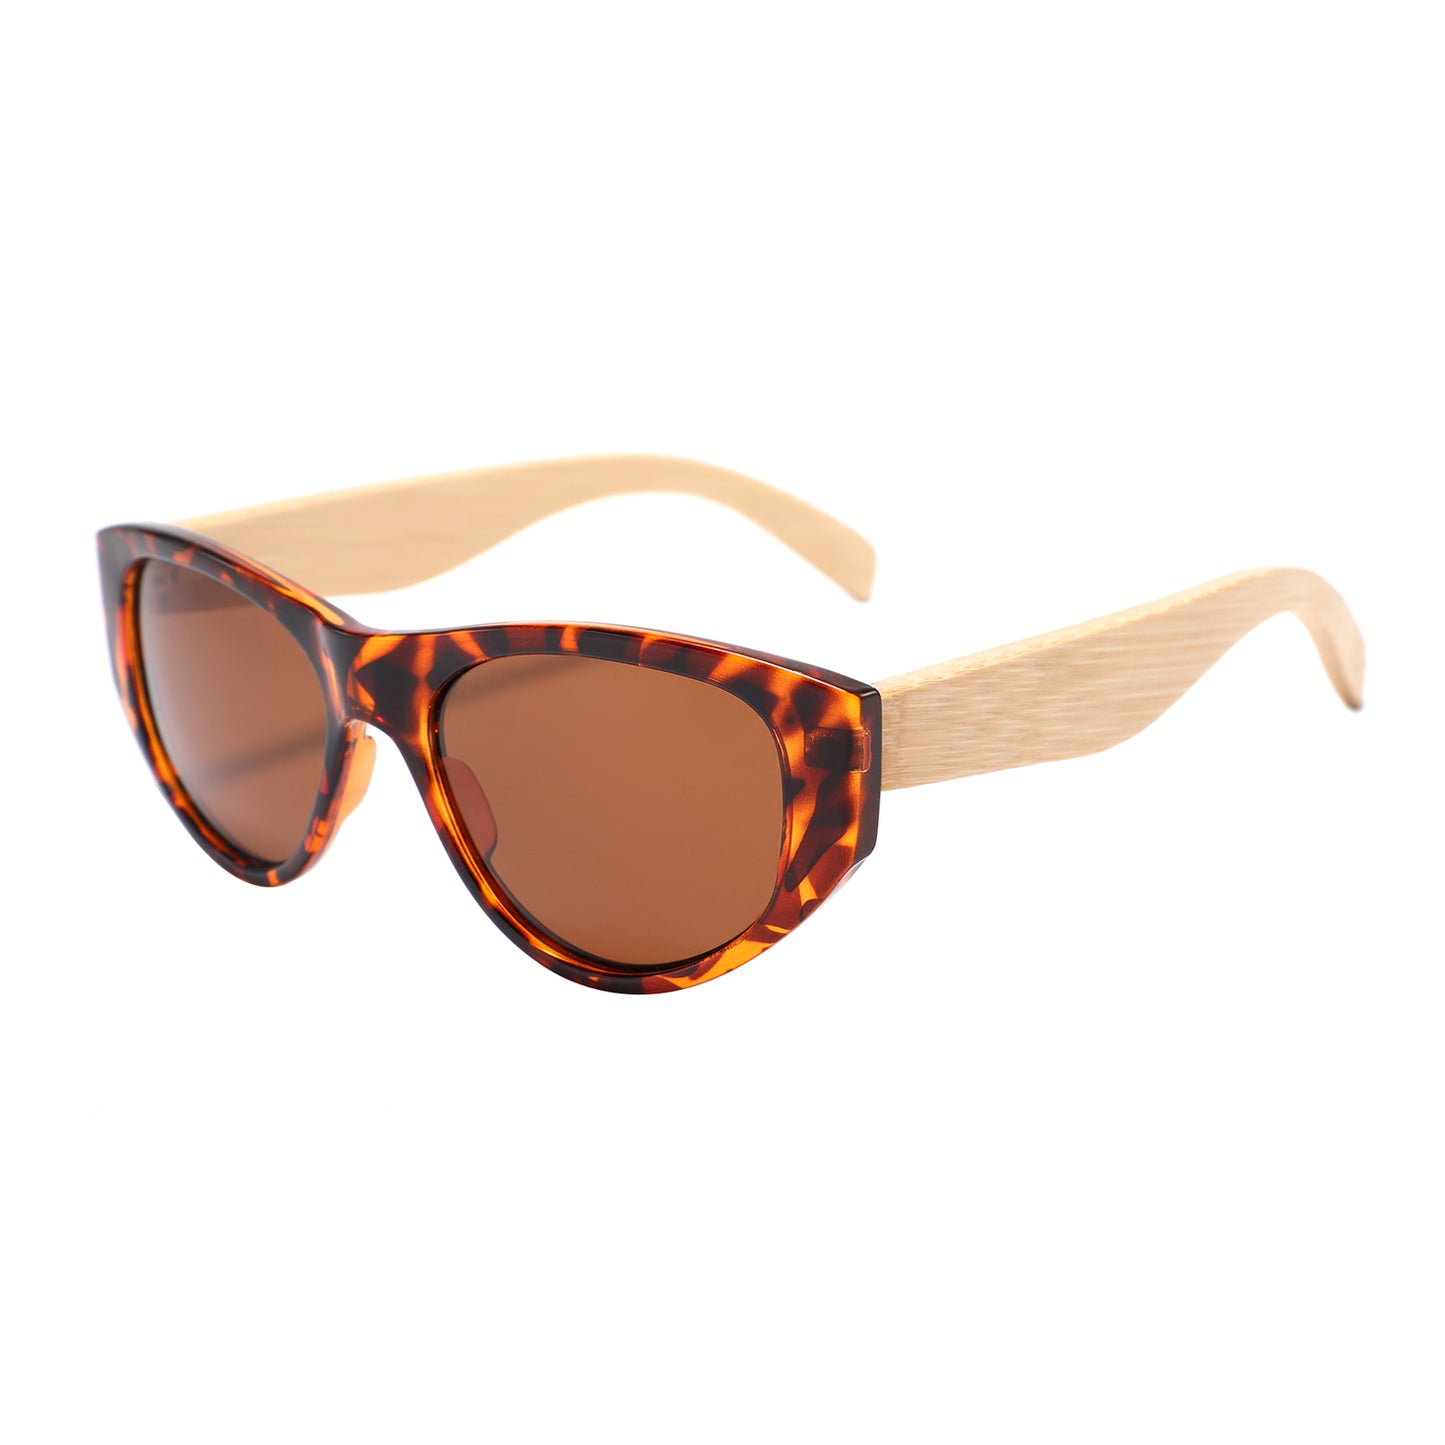 Ladies TS sunglasses with brown polarized lens and bamboo arms by Hashtag Bamboo.